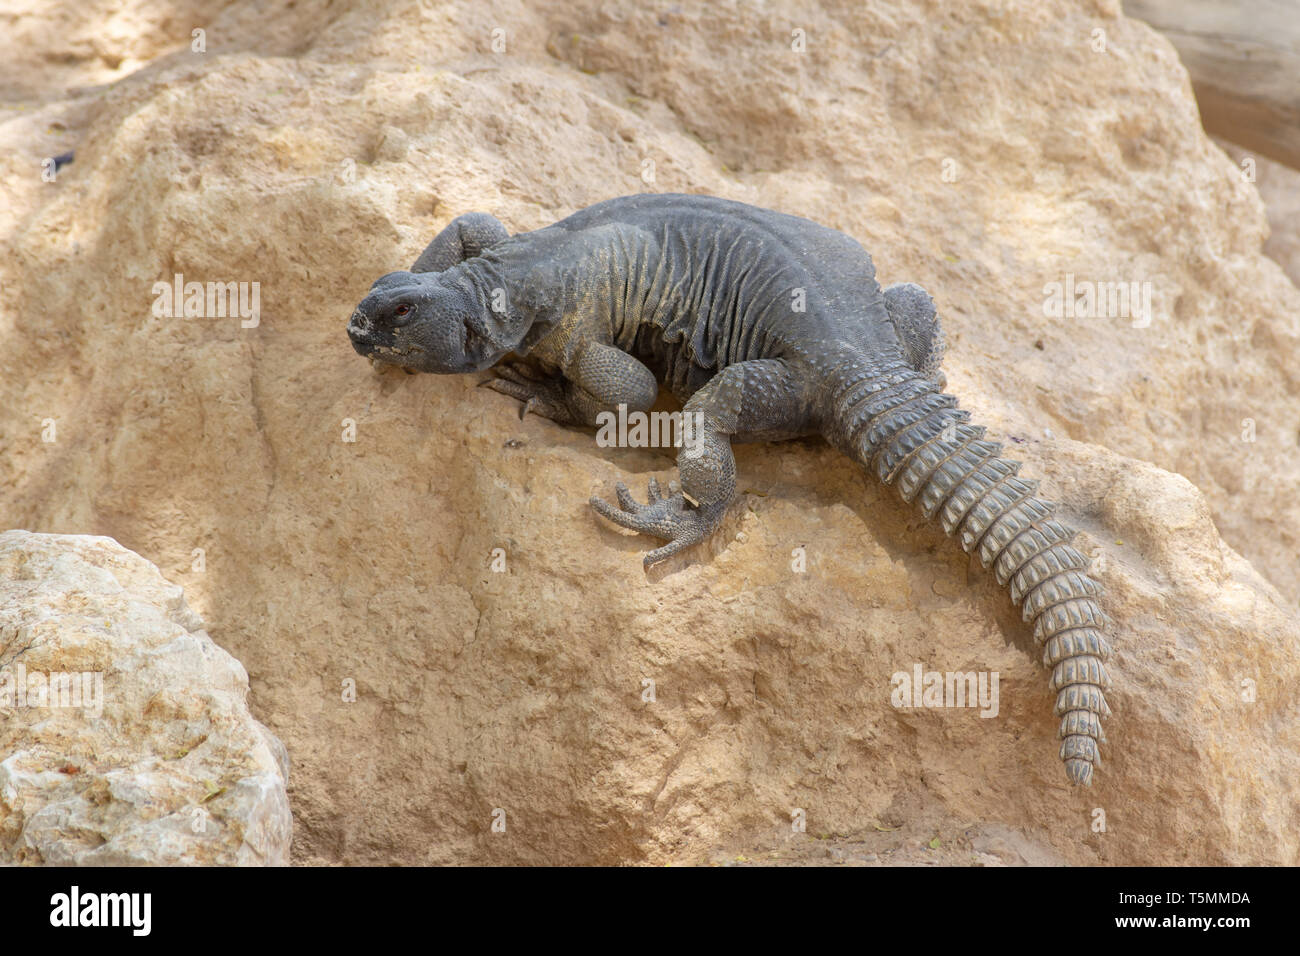 A green Leiptien's Spiny Tailed Lizard resting on a rock looking around for its next move (Uromastyx aegyptia leptieni). Stock Photo